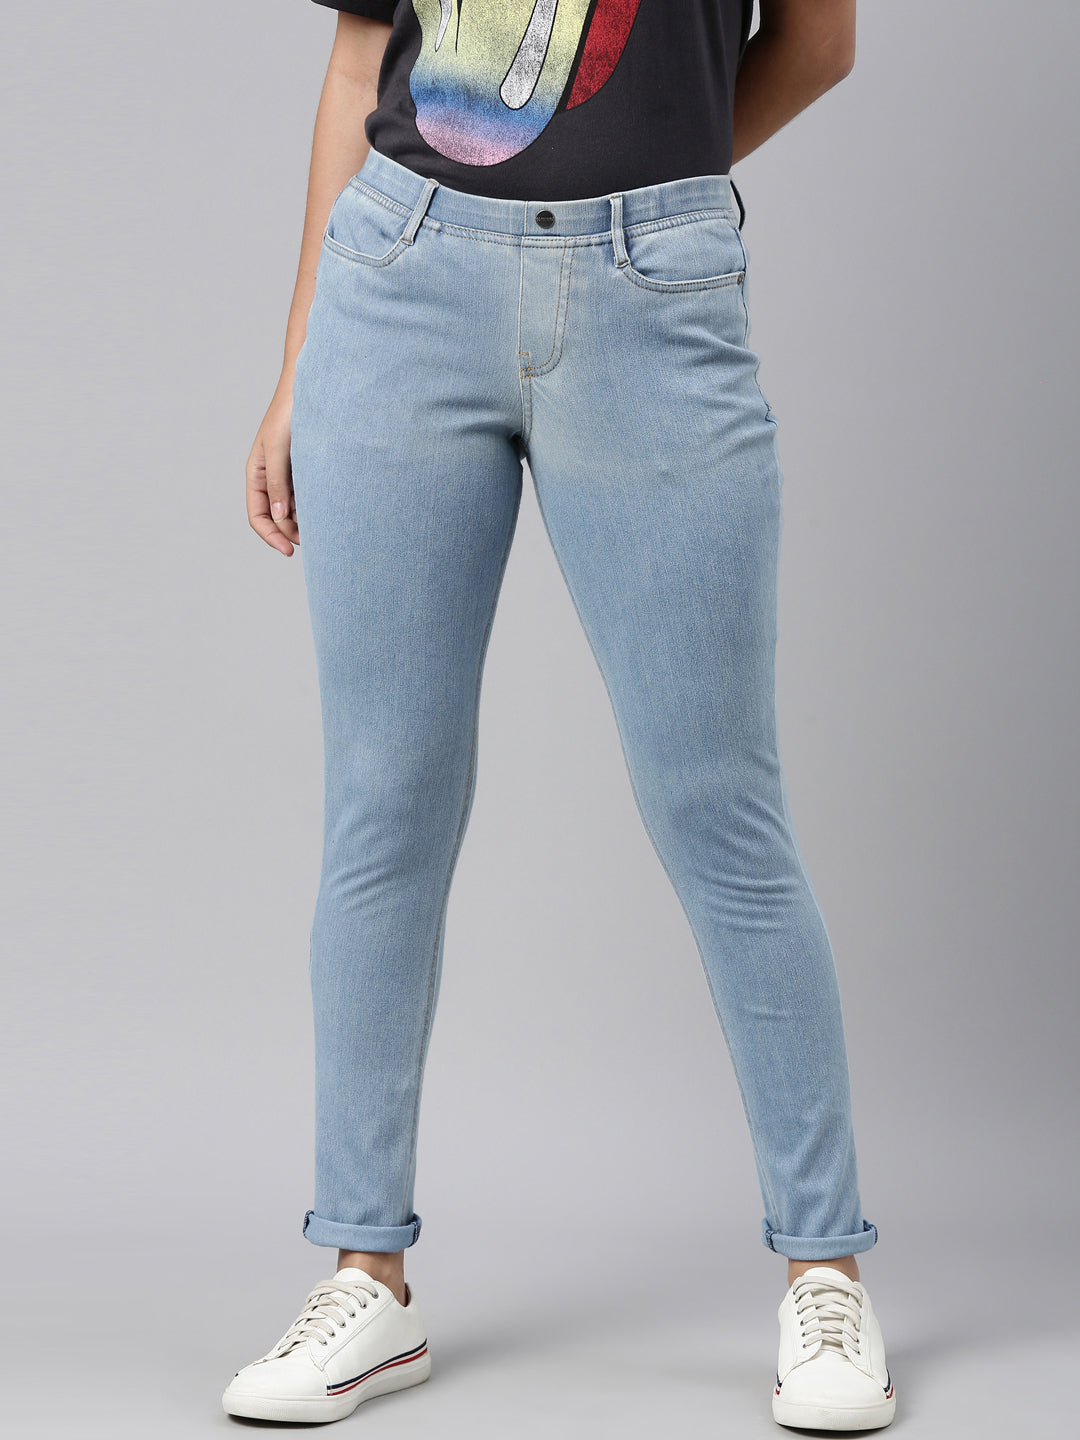 GO COLORS Legging Cropped S (Jean Blue) in Vadodara at best price by Go  Colors - Justdial